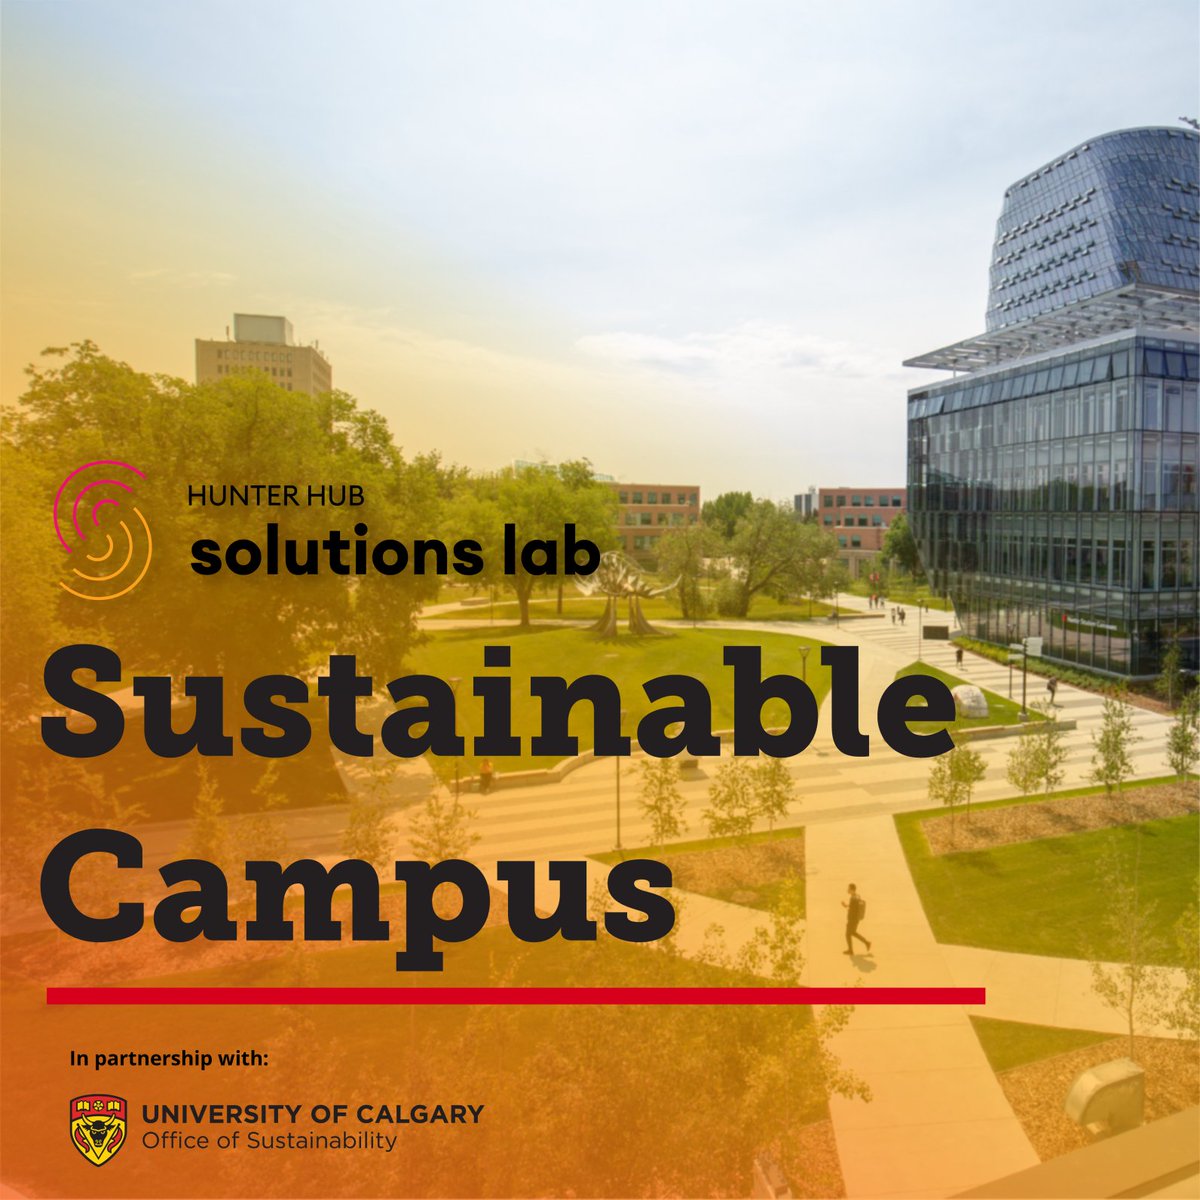 Congratulations to the Hunter Hub Solutions Lab: Sustainable Campus winning teams! 🥳 A HUGE thank you from Experience Ventures and the Hunter Hub to all challenge participants! To learn more about the Hunter Hub, visit hunterhub.ucalgary.ca